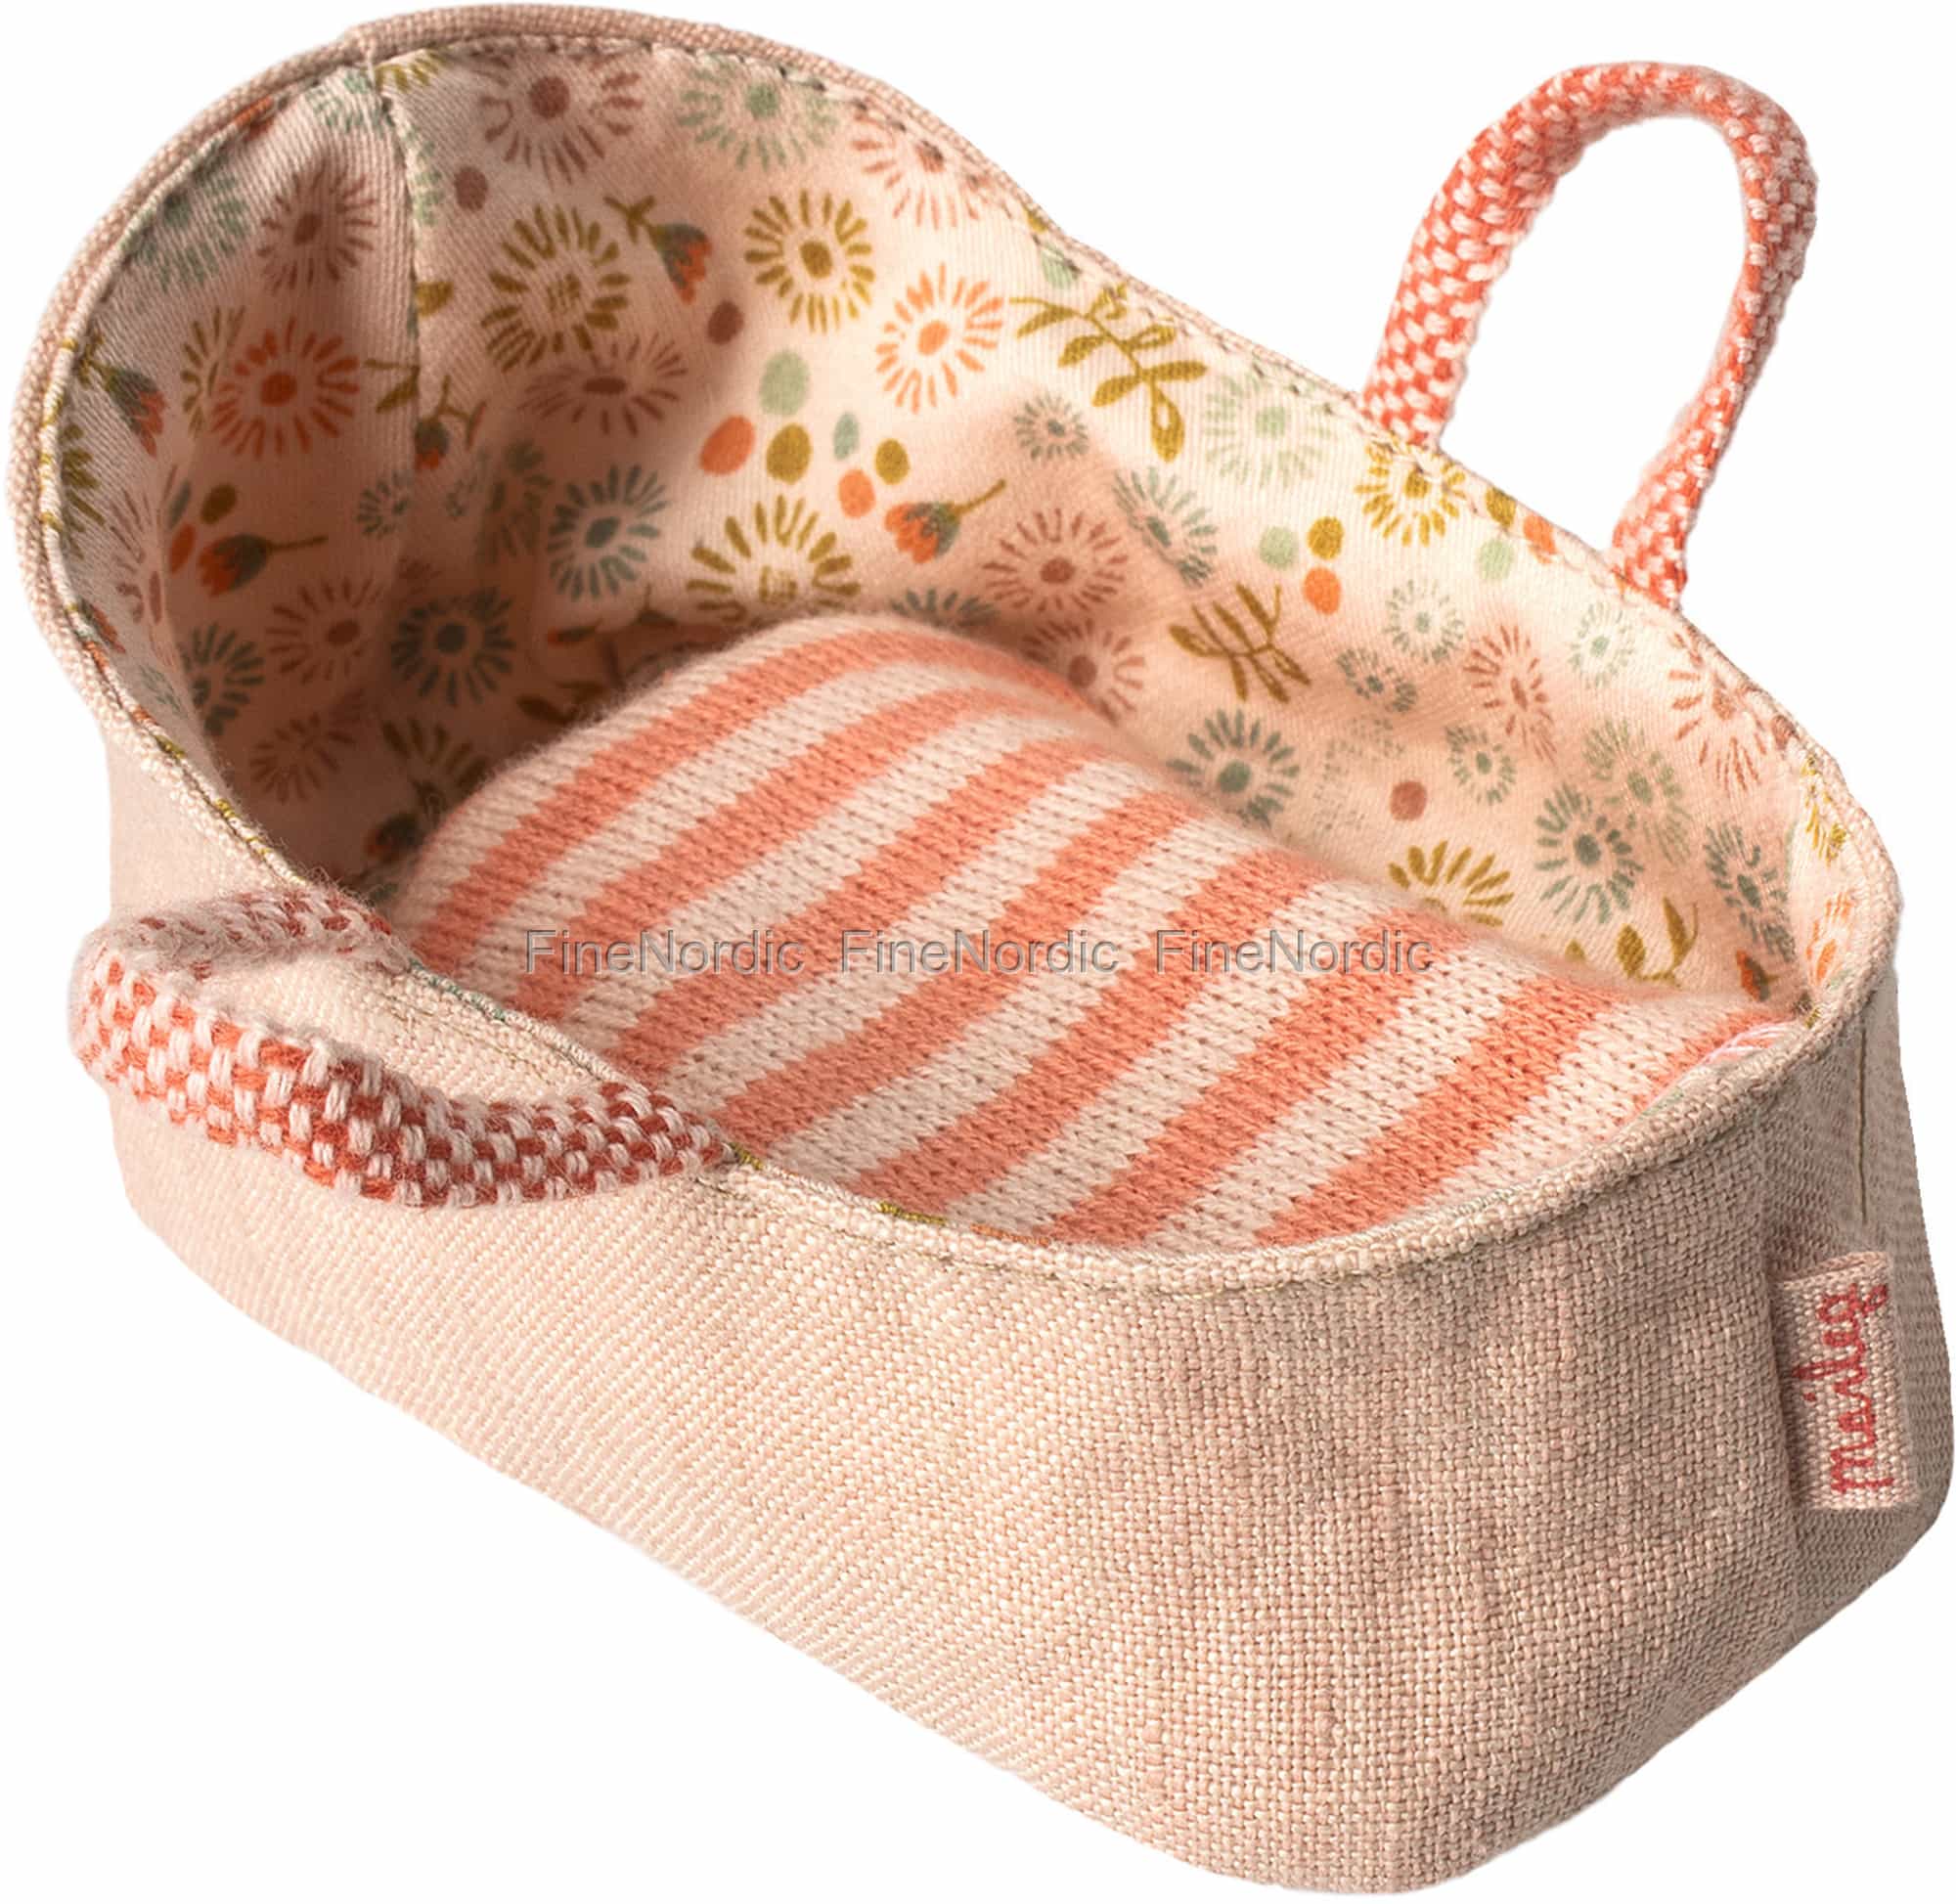 maileg baby mouse in carrycot